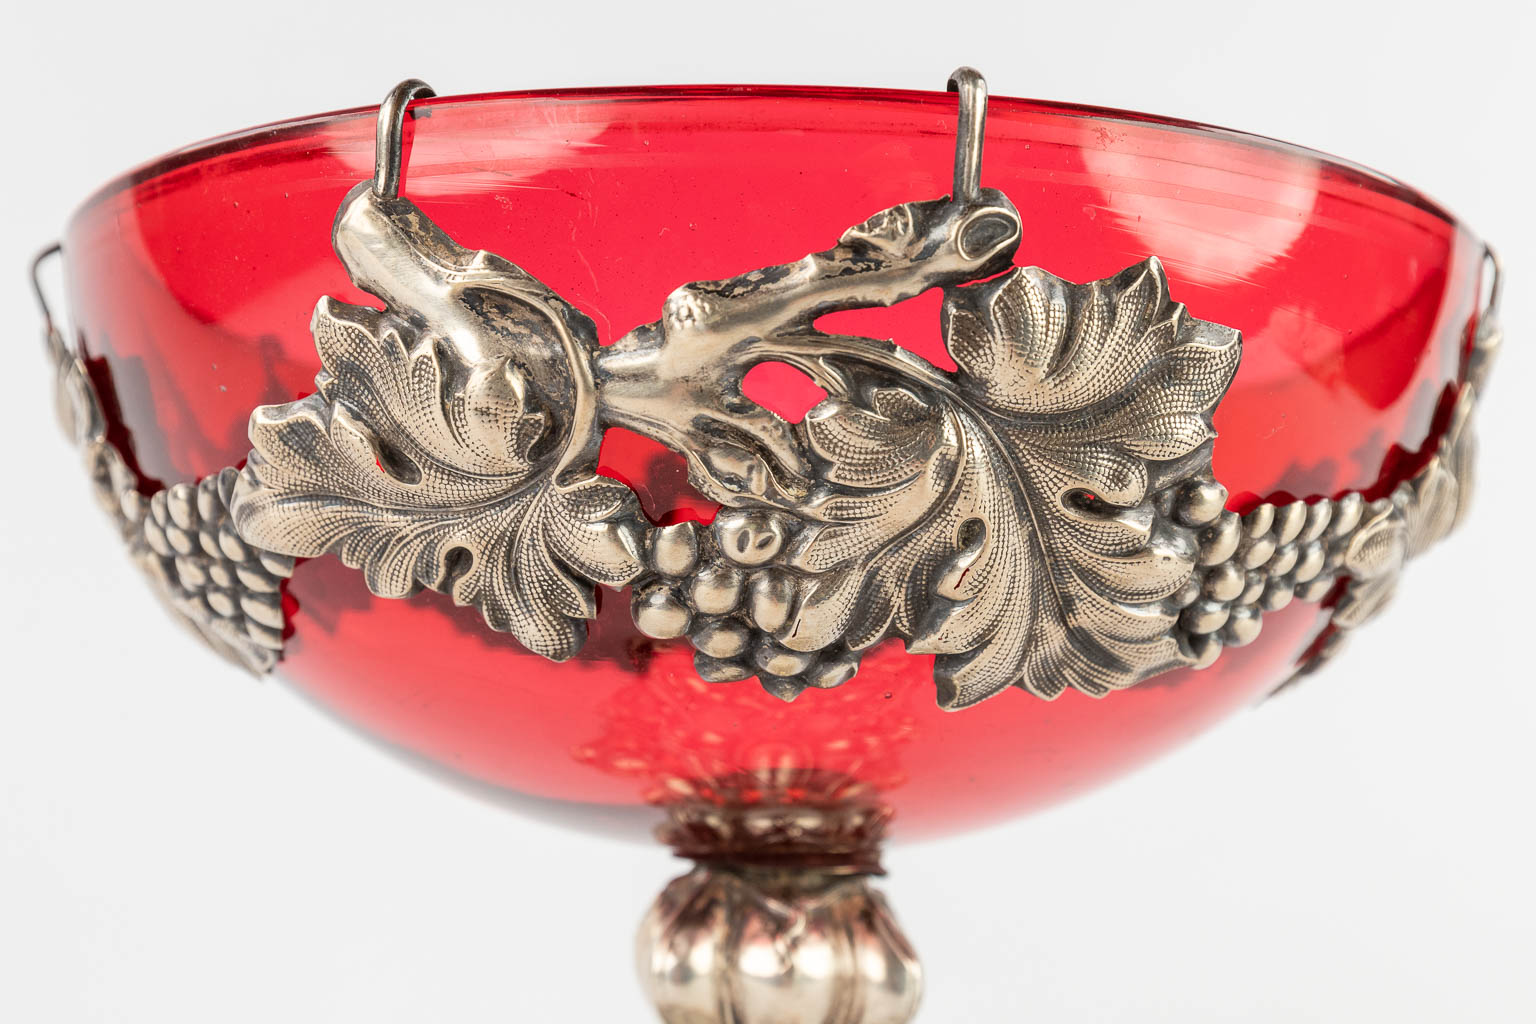 A red glass bowl on a silver base, decorated with grape vines. (H:20 x D:18,5 cm) - Image 9 of 14